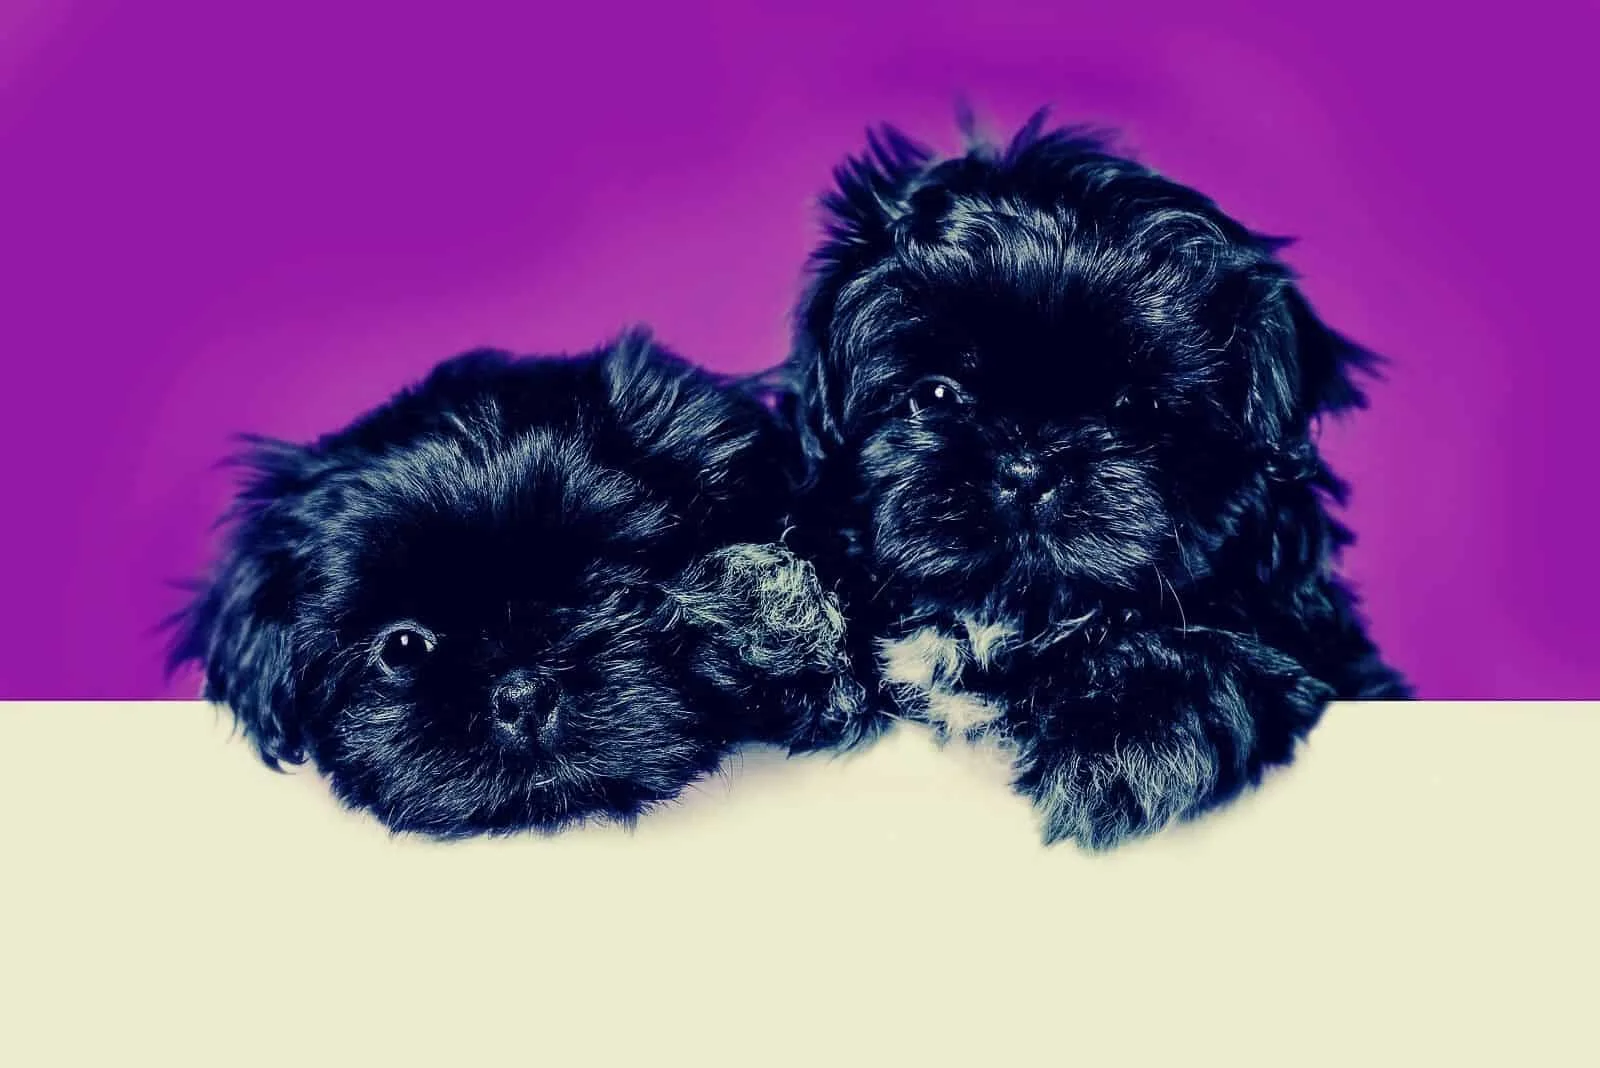 blue shih tzu puppies lying down next to each other in purple background